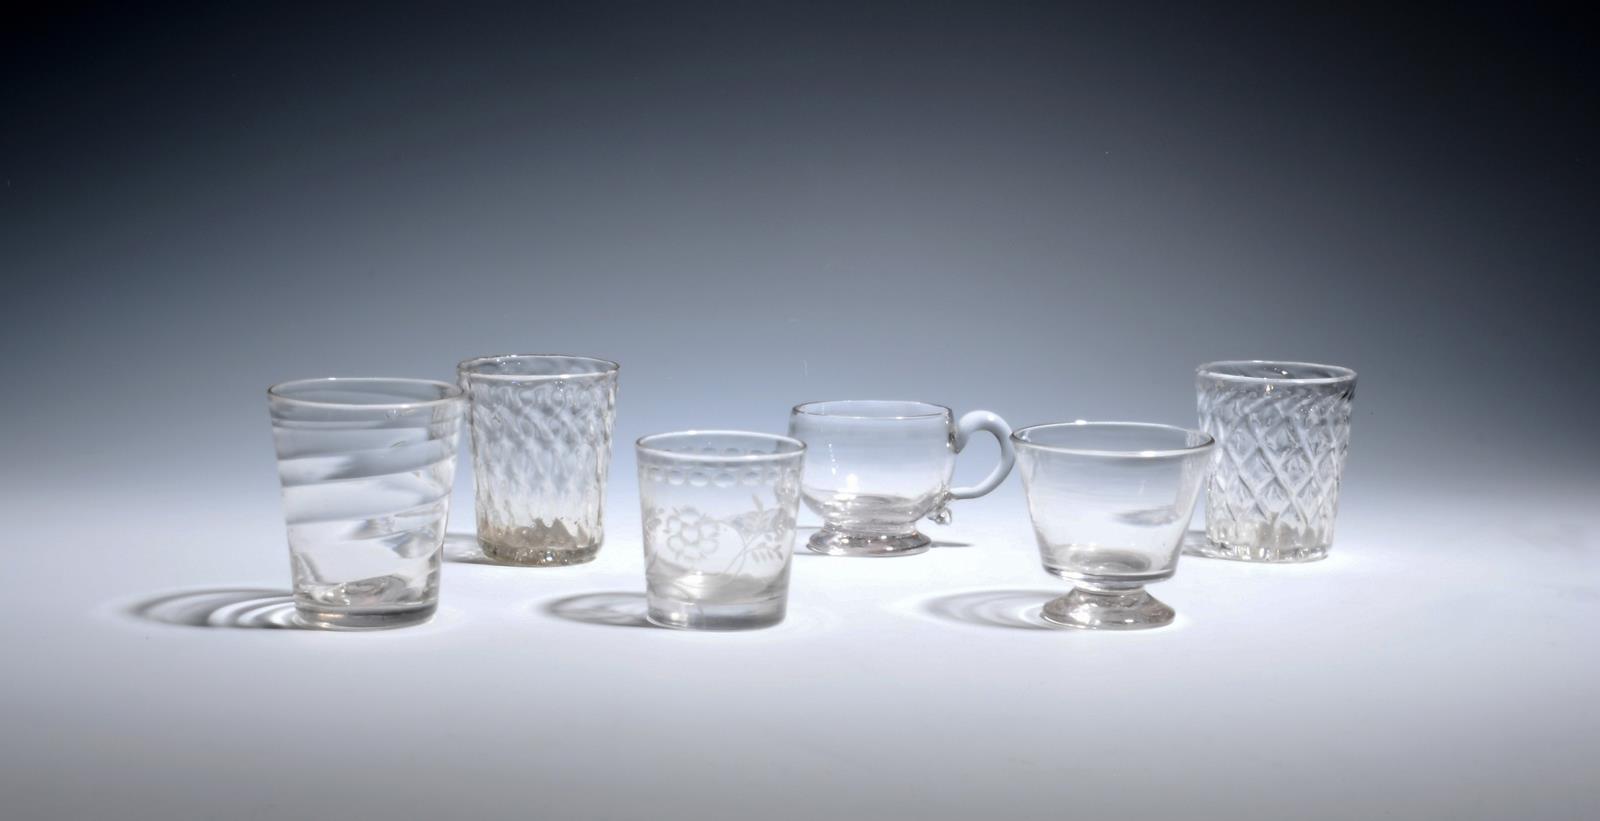 Three small glass tumblers c.1760-80, one of Lynn type with horizontal moulding, two others with